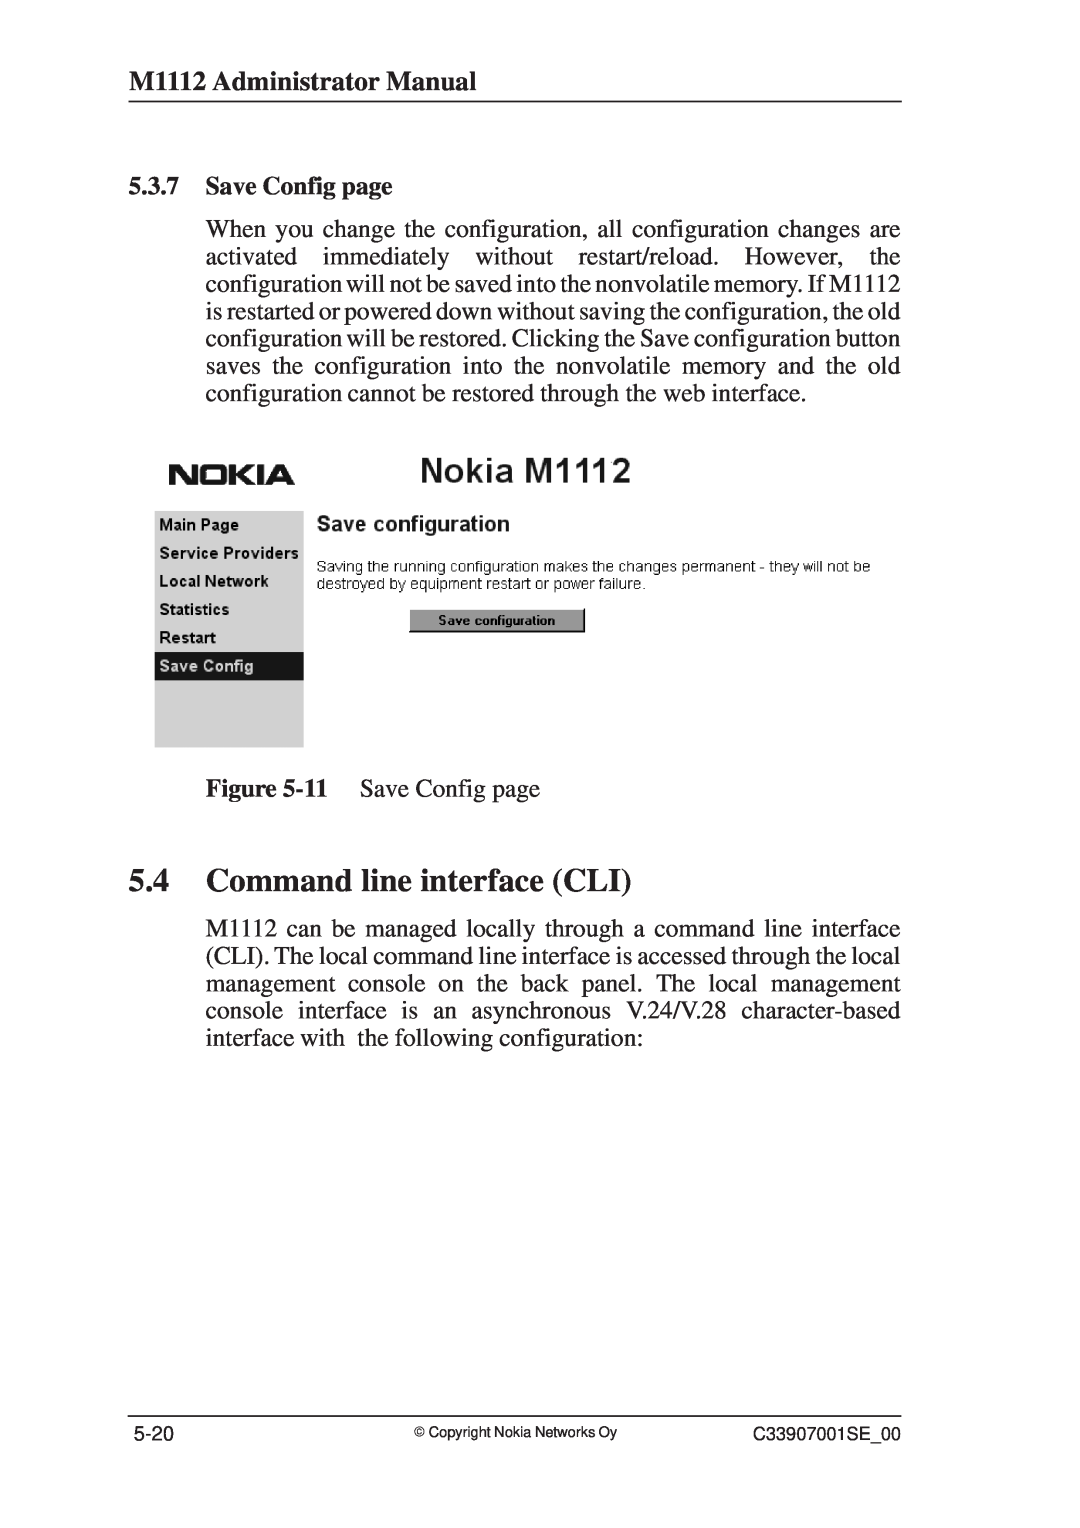 Nokia manual Command line interface CLI, M1112 Administrator Manual, Save Config page 